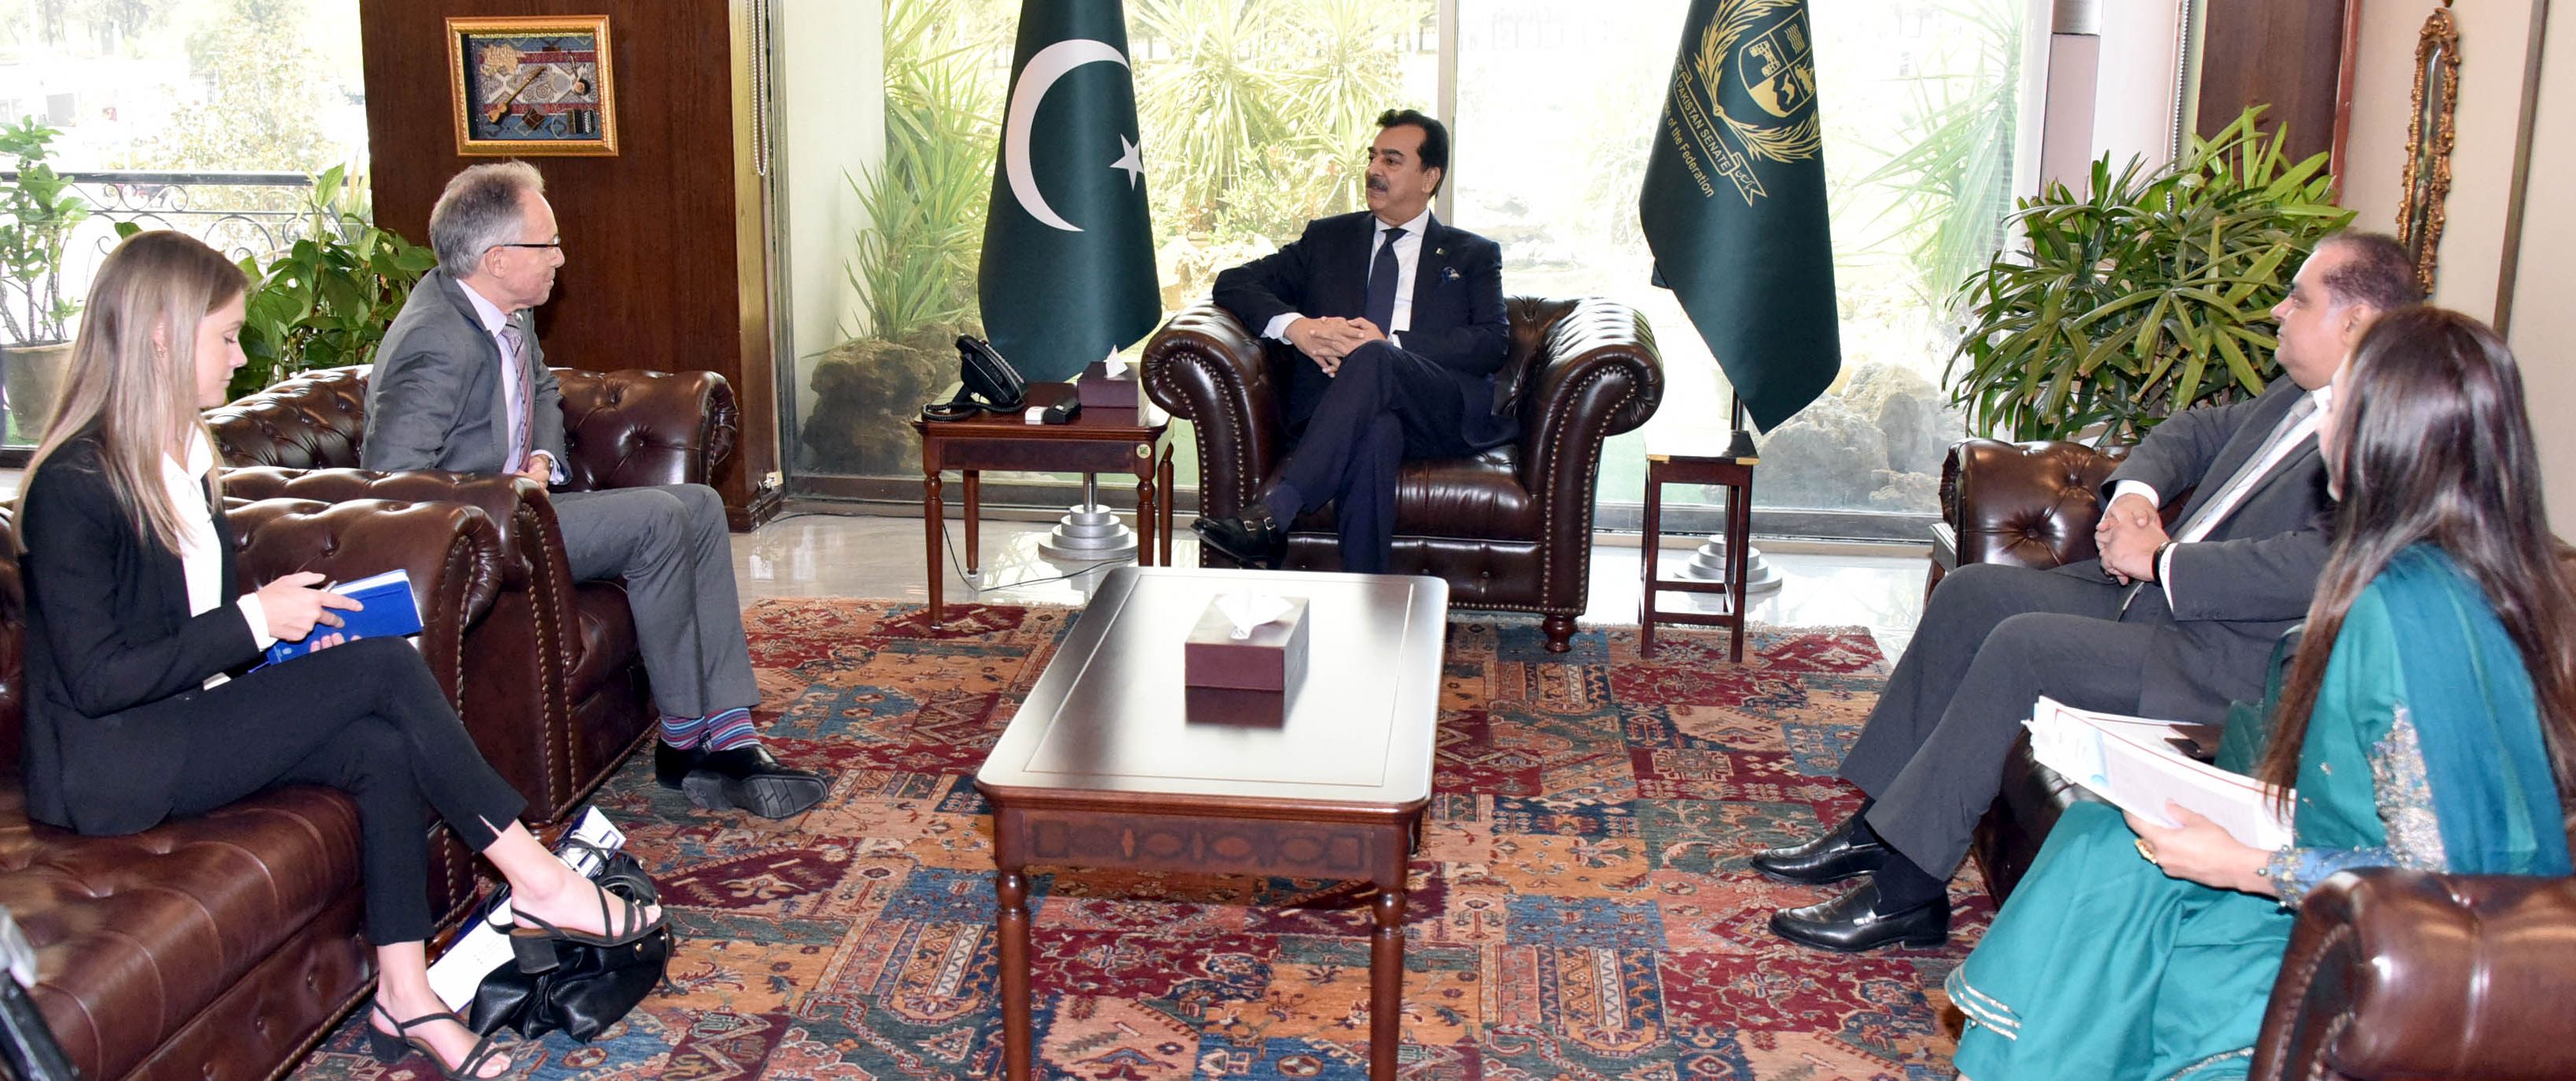 Chairman Senate, Syed Yousuf Raza Gilani in a Meeting with Australian High Commissioner Mr. Neil Hawkins at Parliament House Islamabad